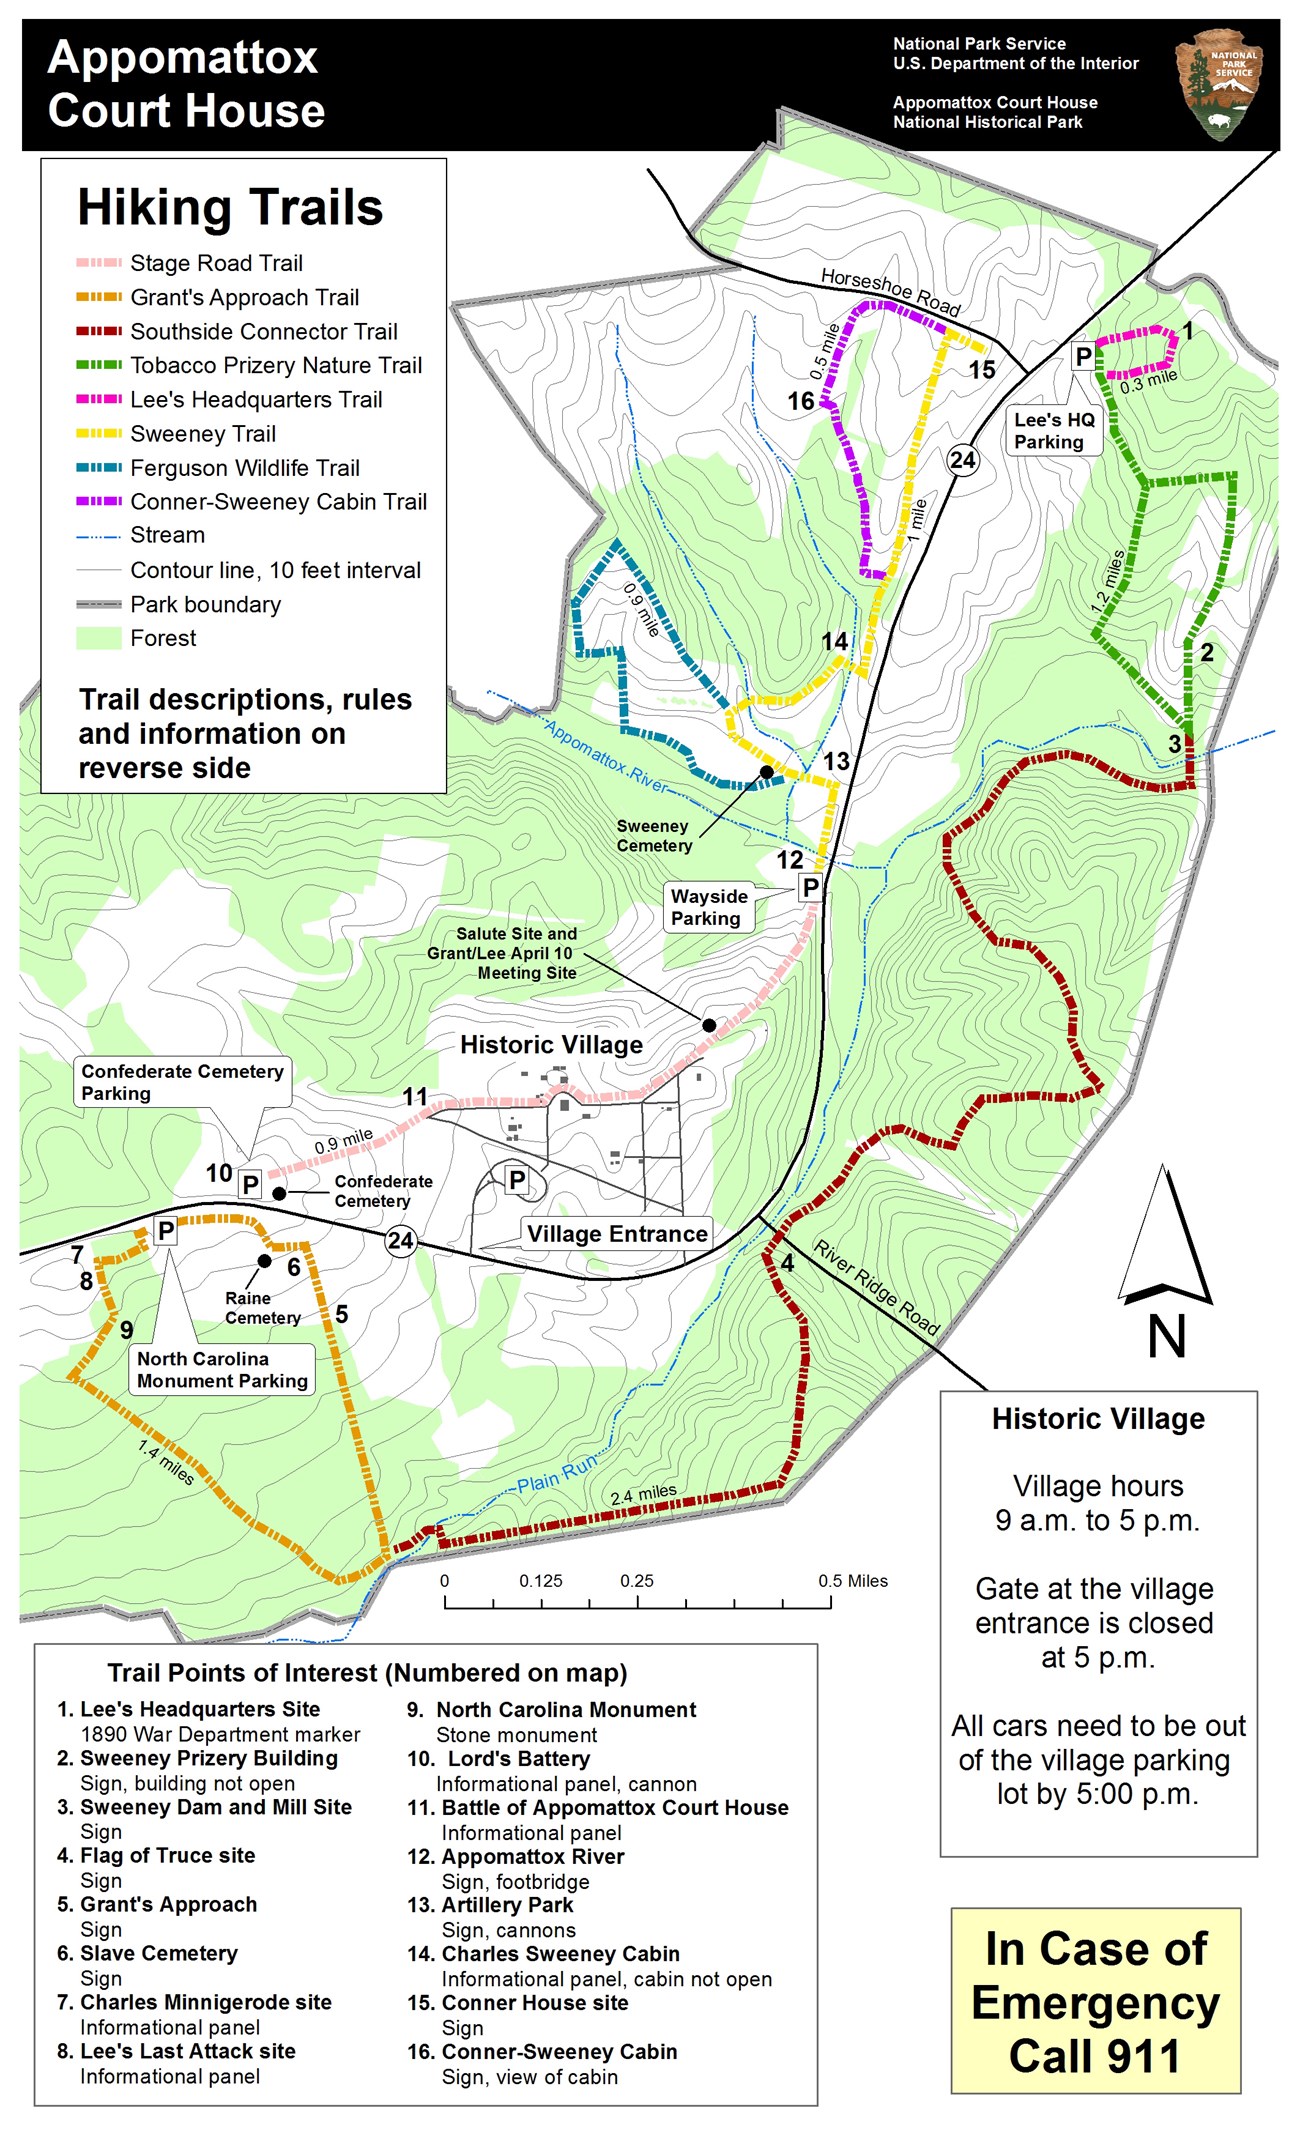 Map of trails within Appomattox Court House NHP